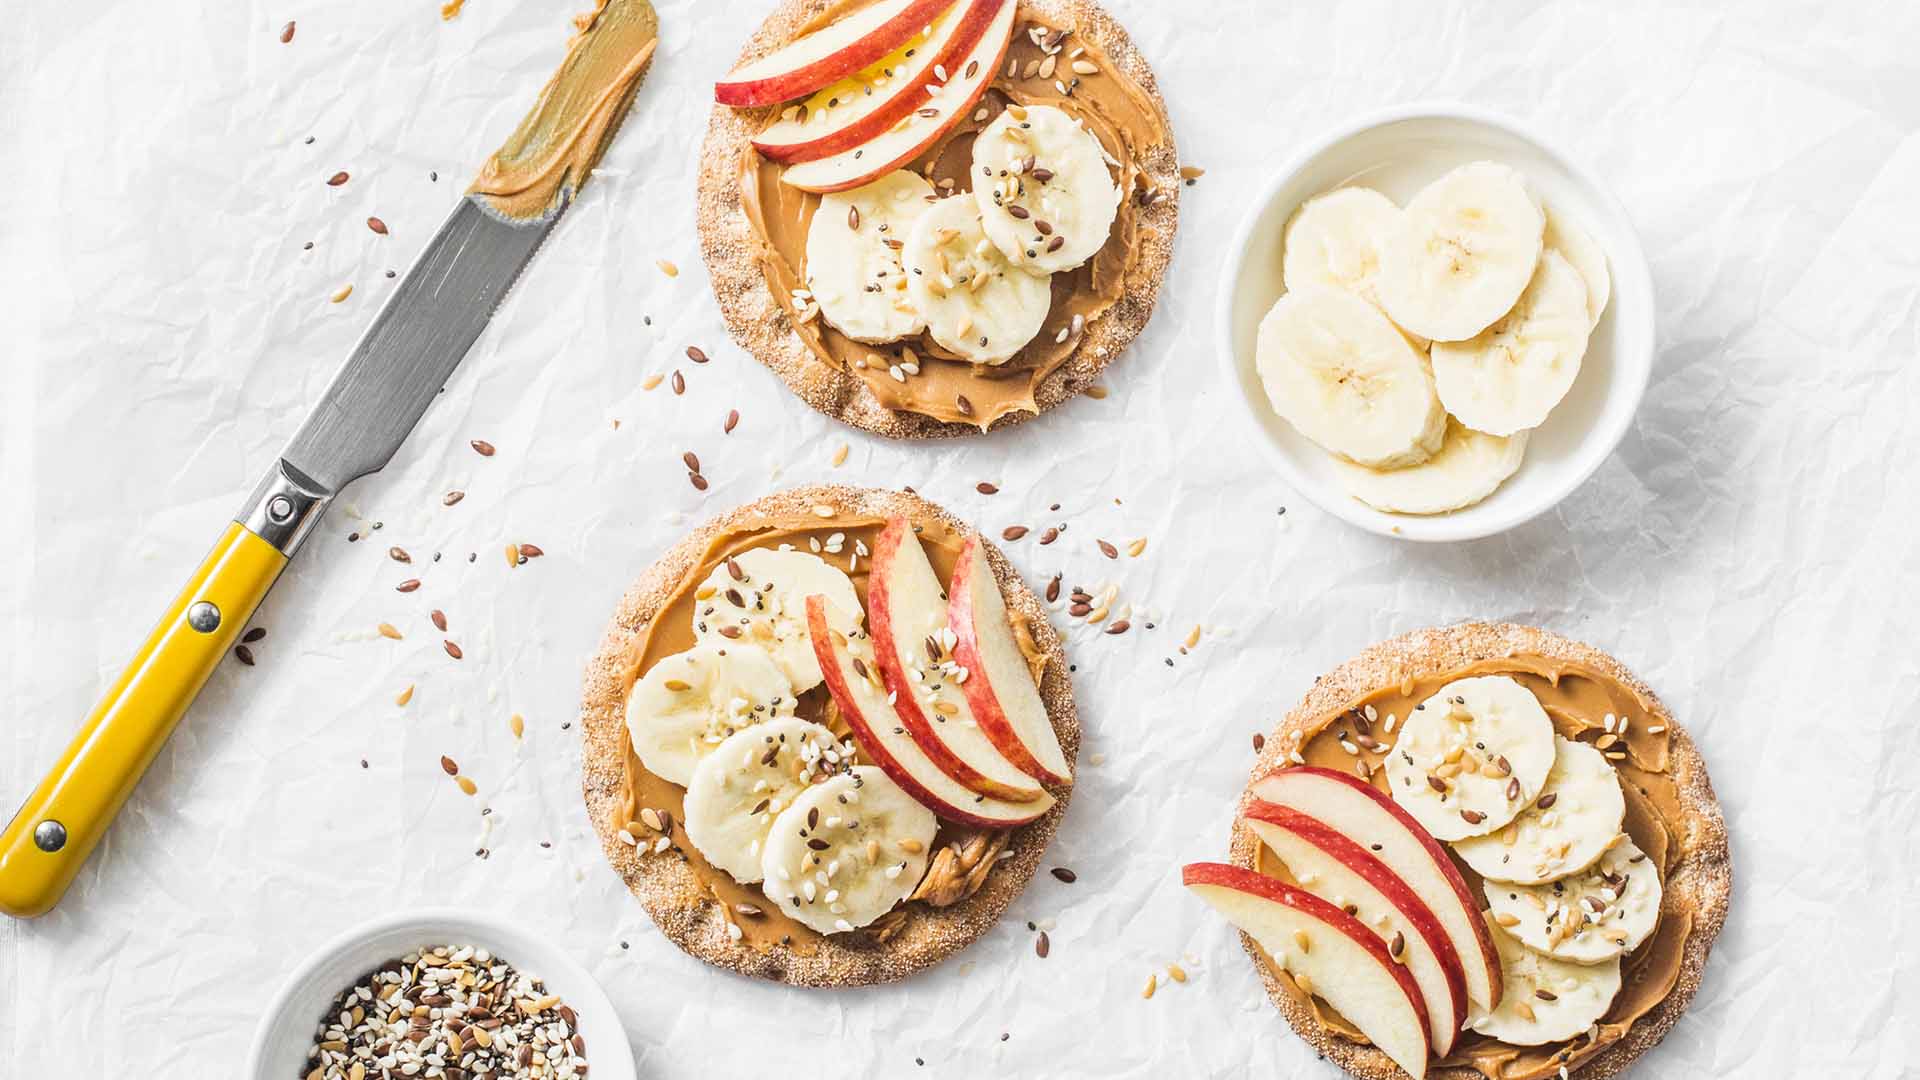 Peanut butter, apple, banana, flax and chia seed  crackers toast on a light background, top view